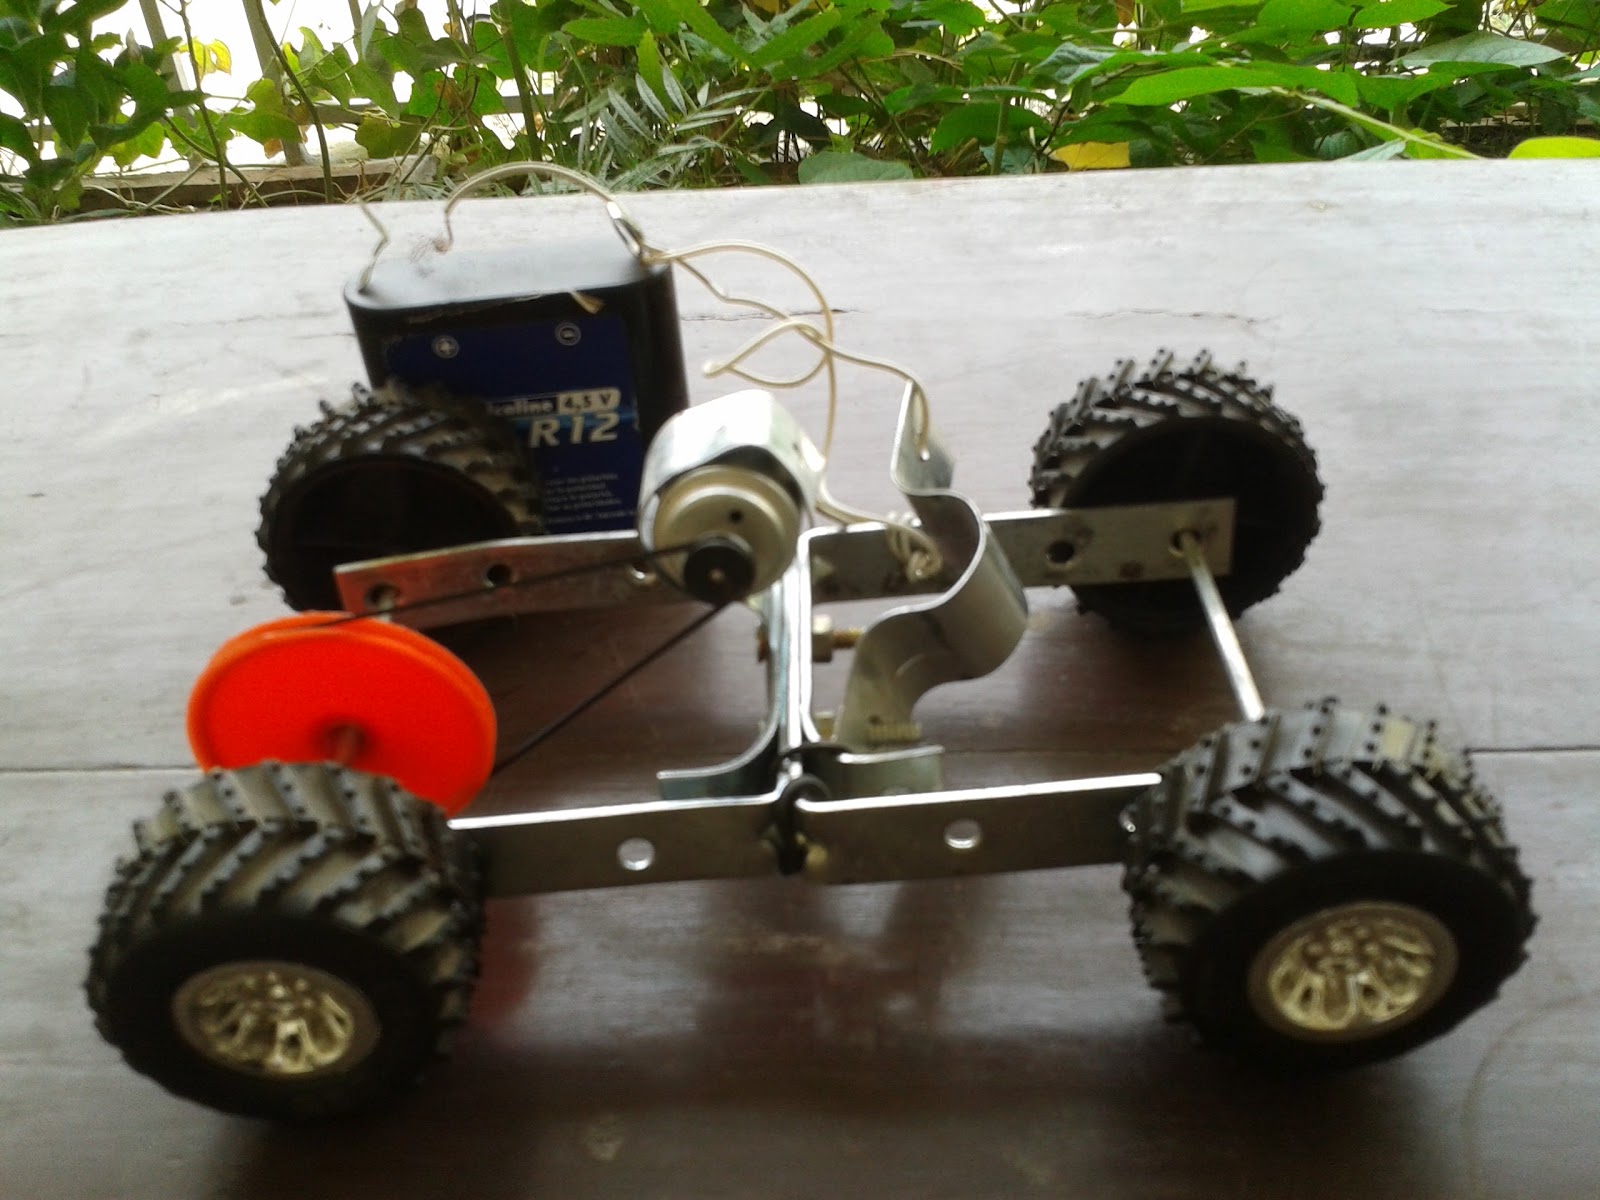 Exploring Science Working model of battery operated vehicle